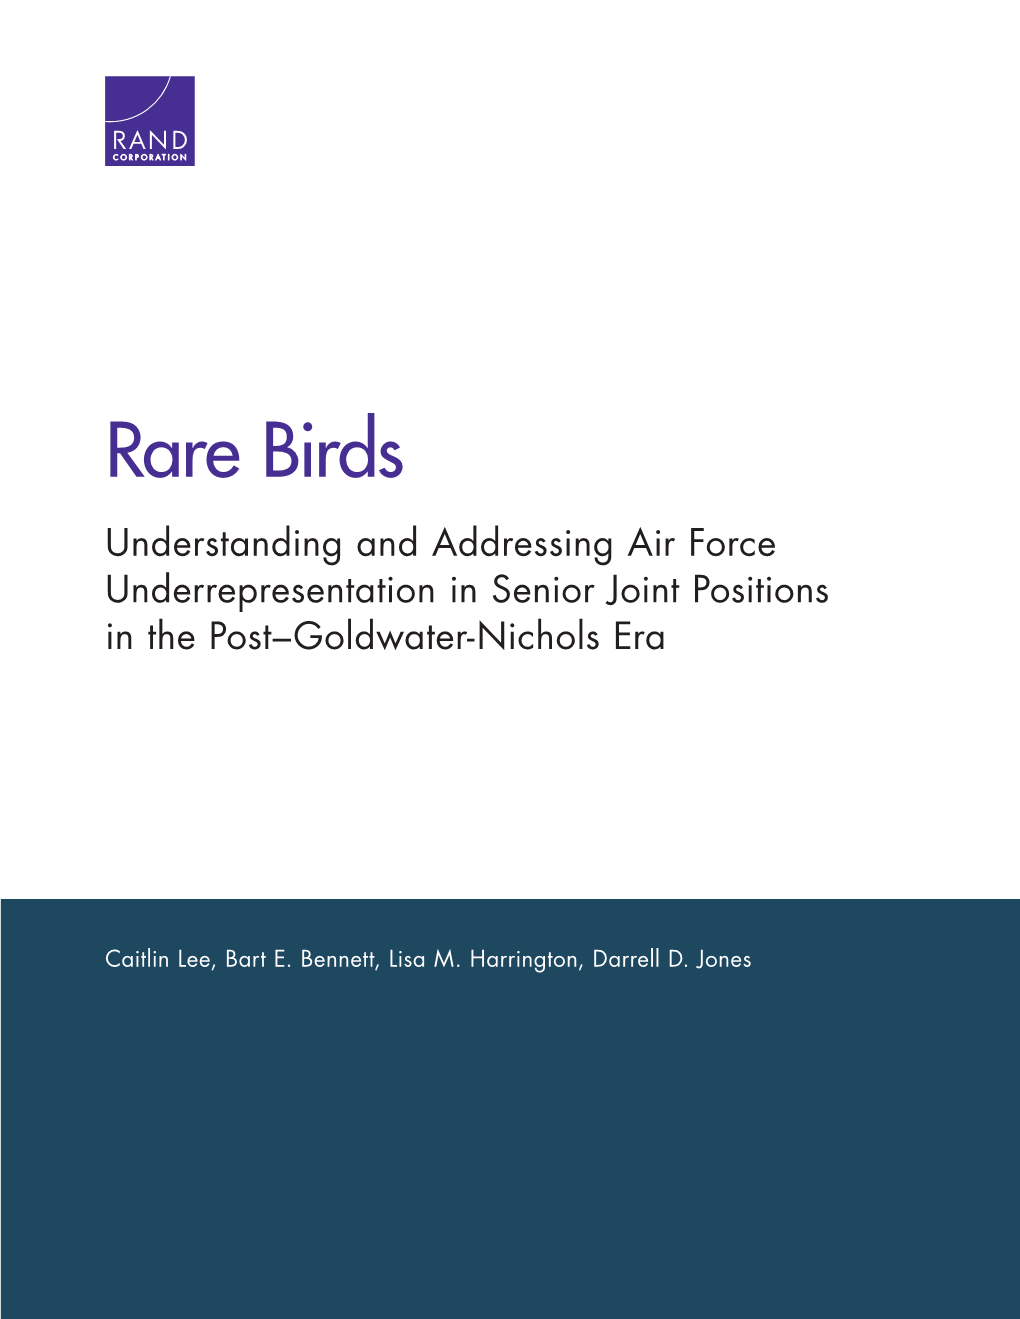 Understanding and Addressing Air Force Underrepresentation in Senior Joint Positions in the Post–Goldwater-Nichols Era